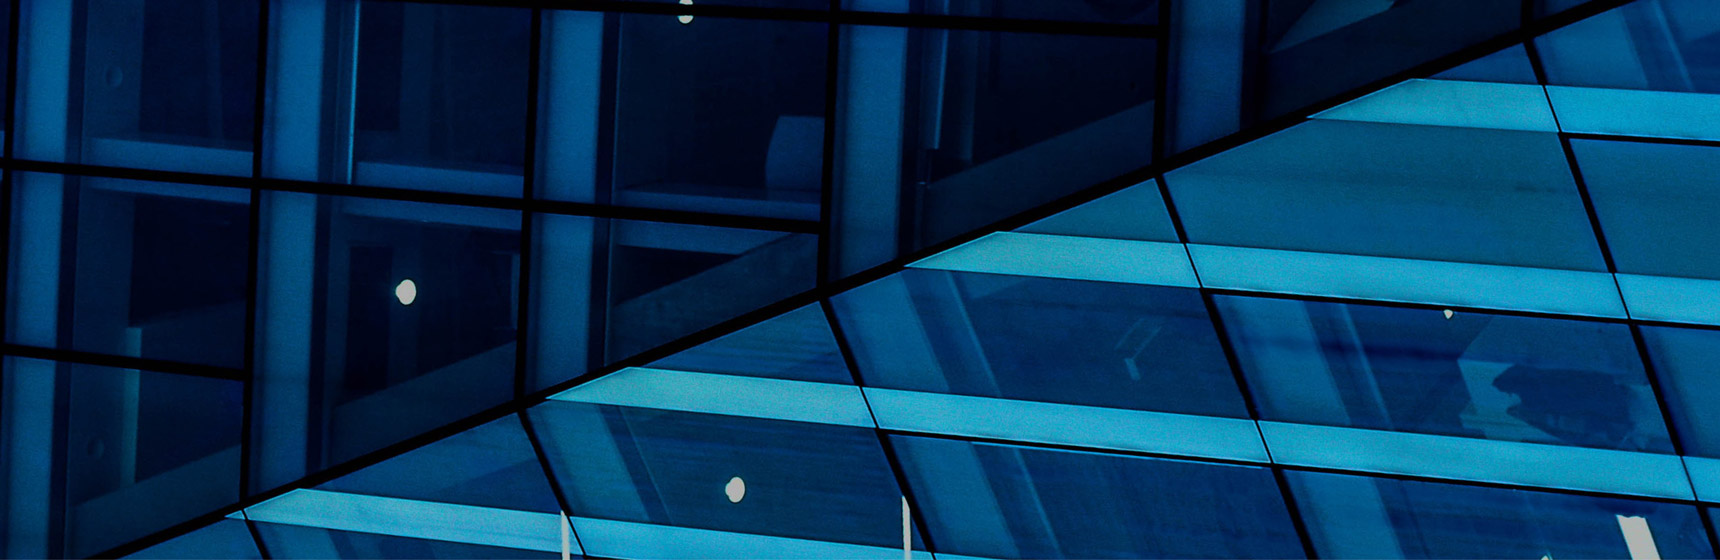 blue-building-abstract.jpg